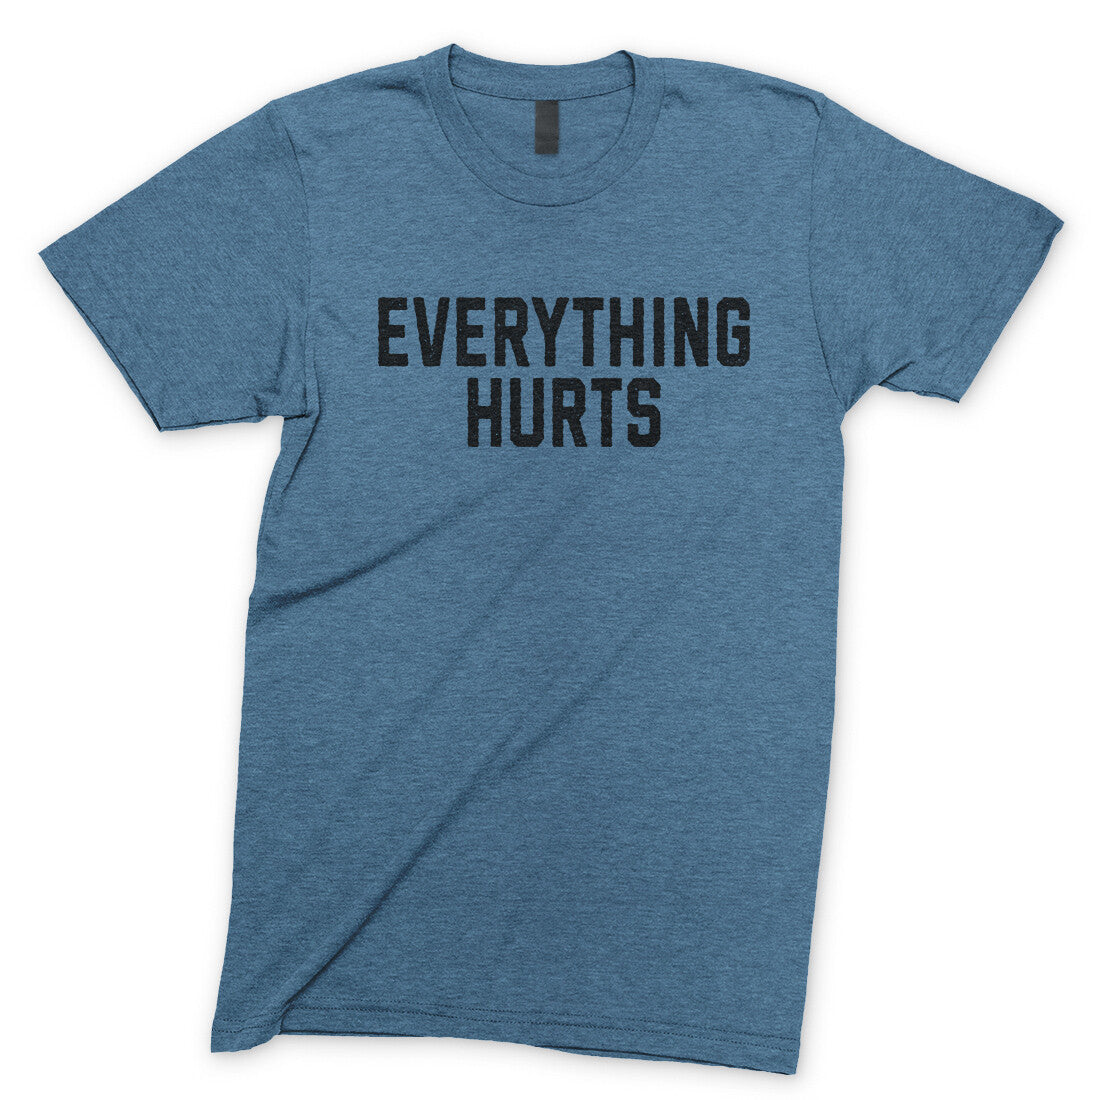 Everything Hurts in Heather Indigo Color